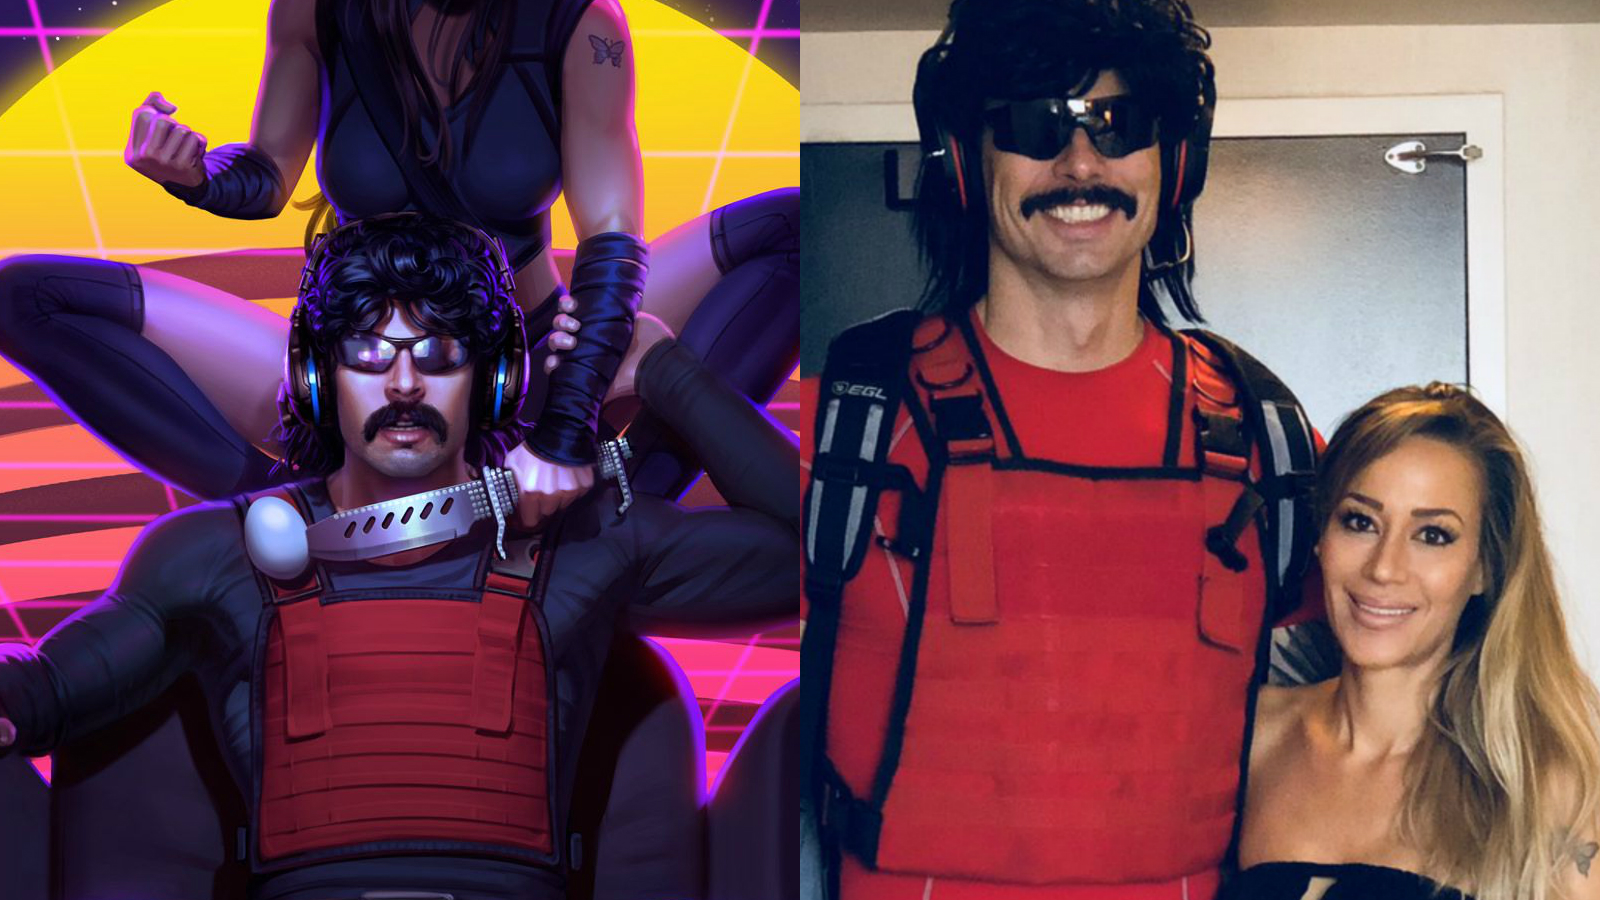 courtney klemm recommends dr disrespect girl he cheated with pic